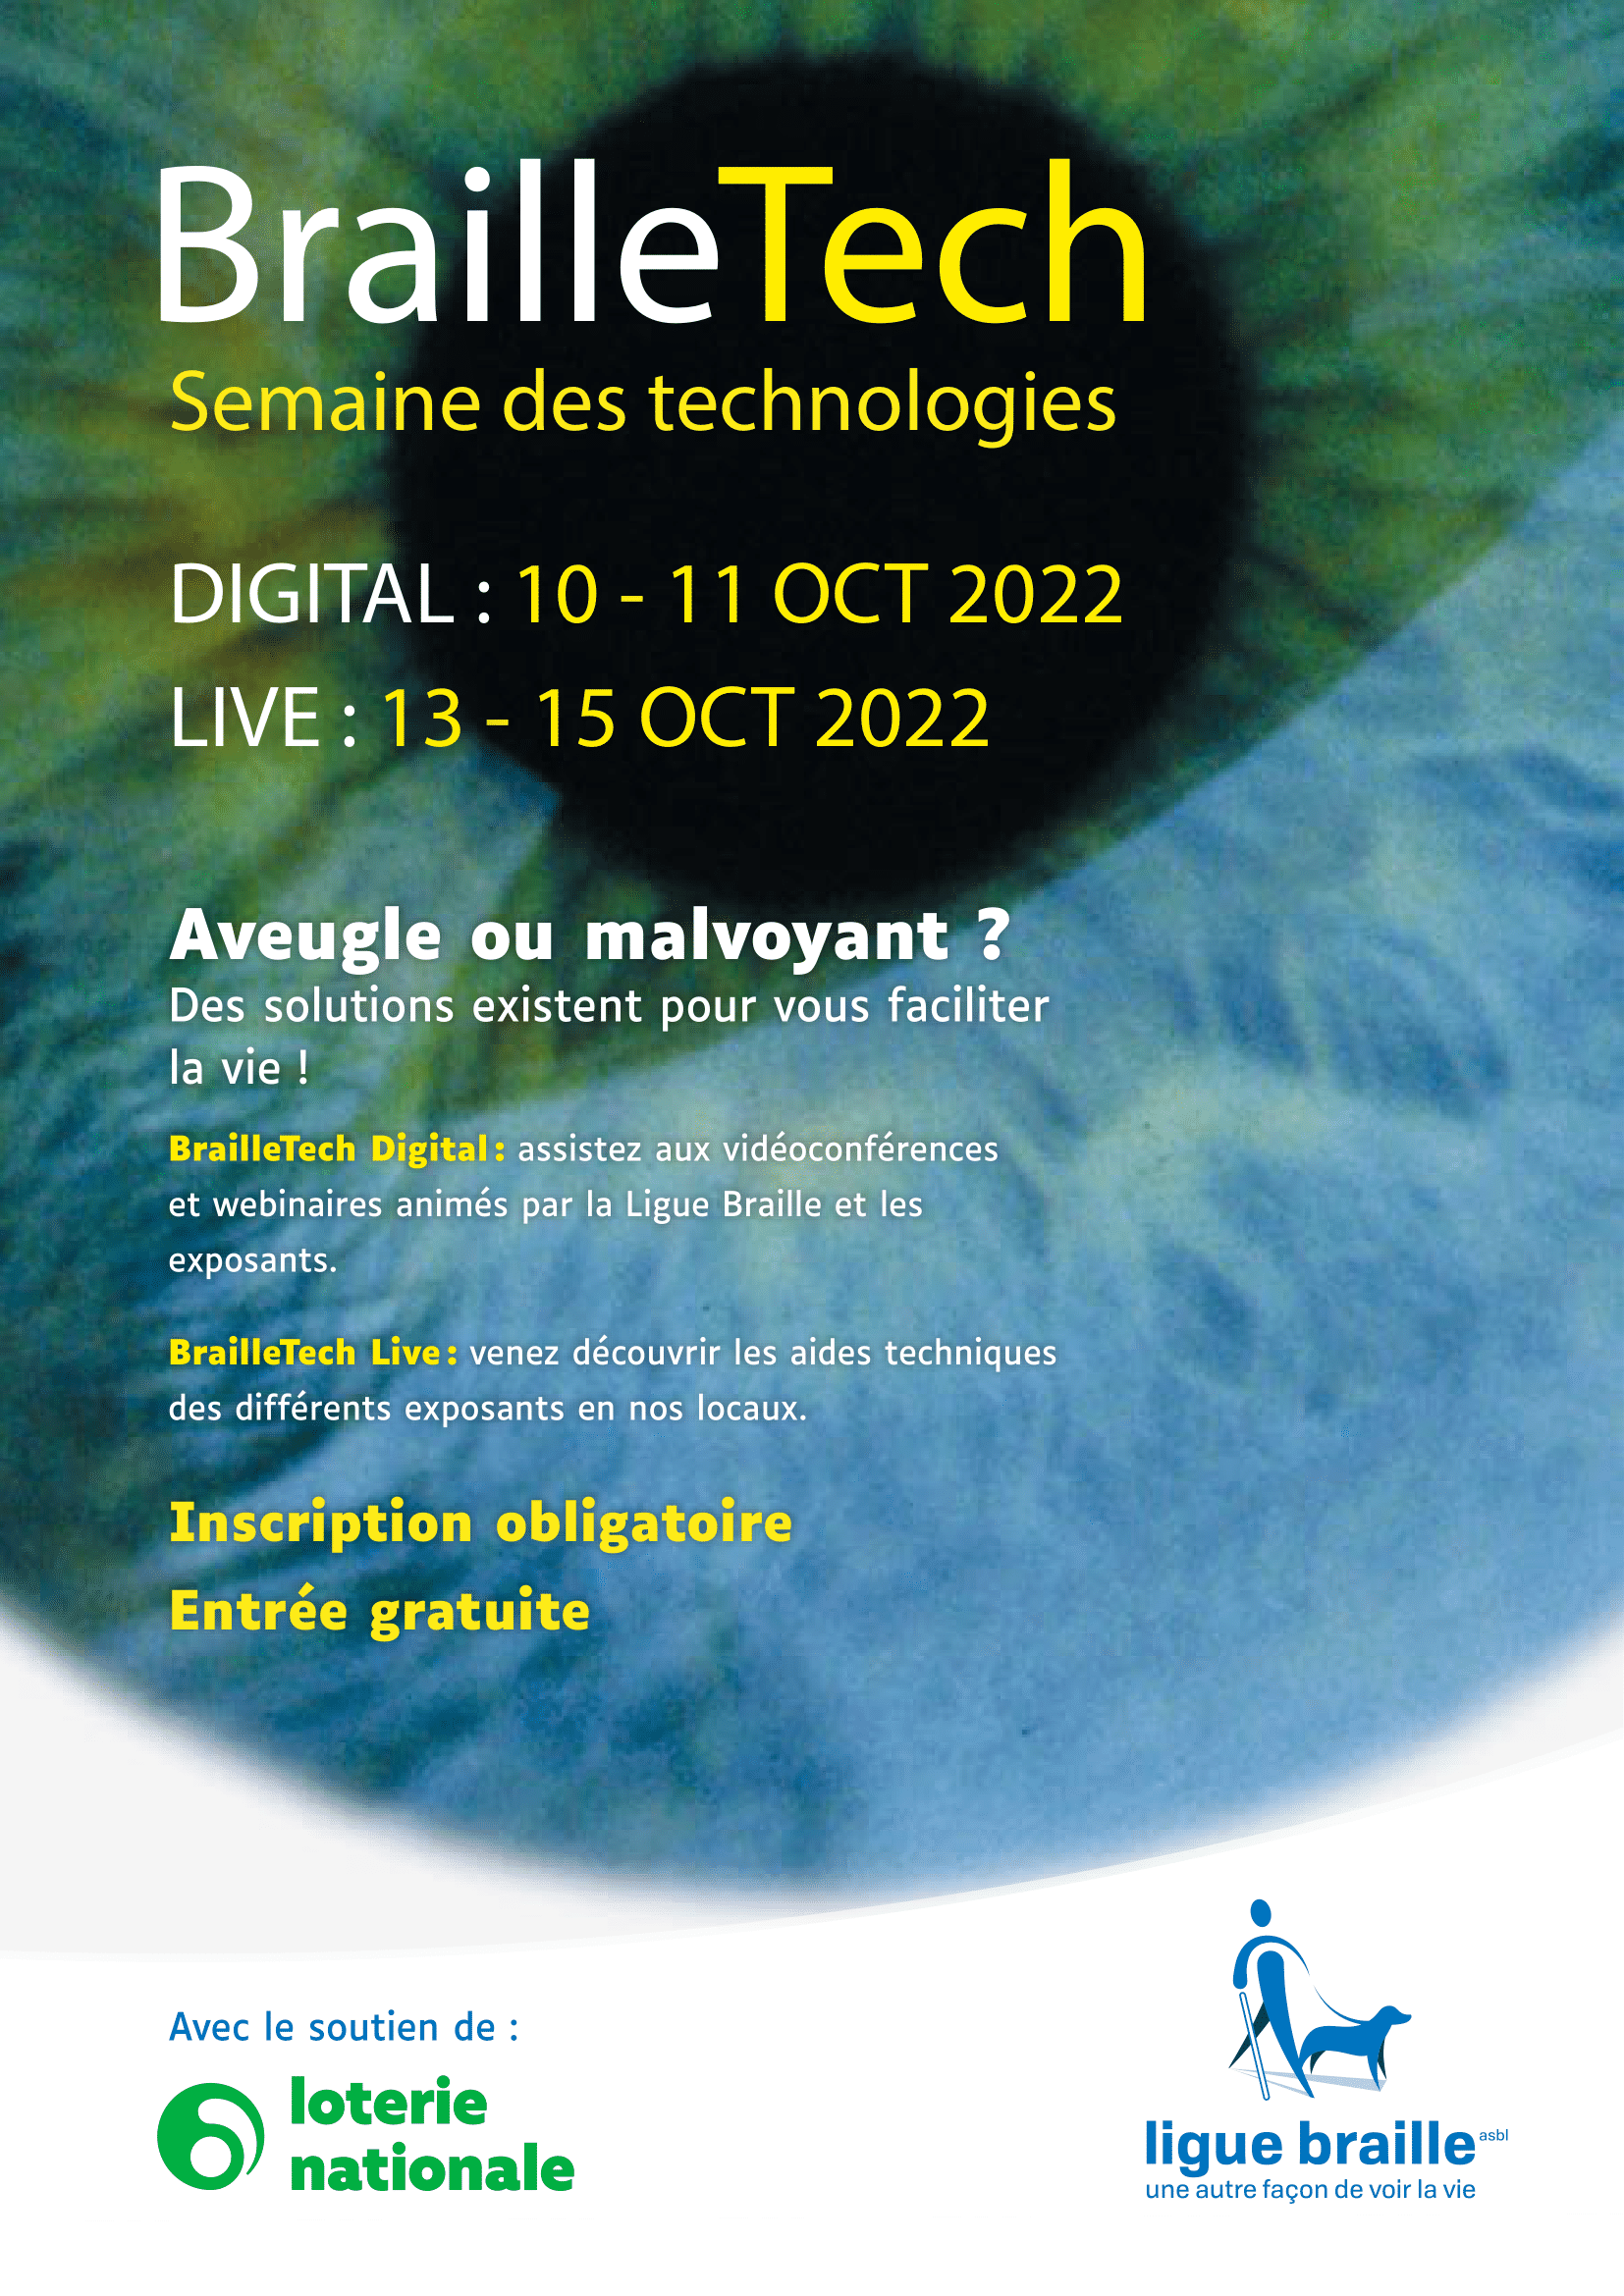 BrailleTech 2022 Save the Date affiche FR